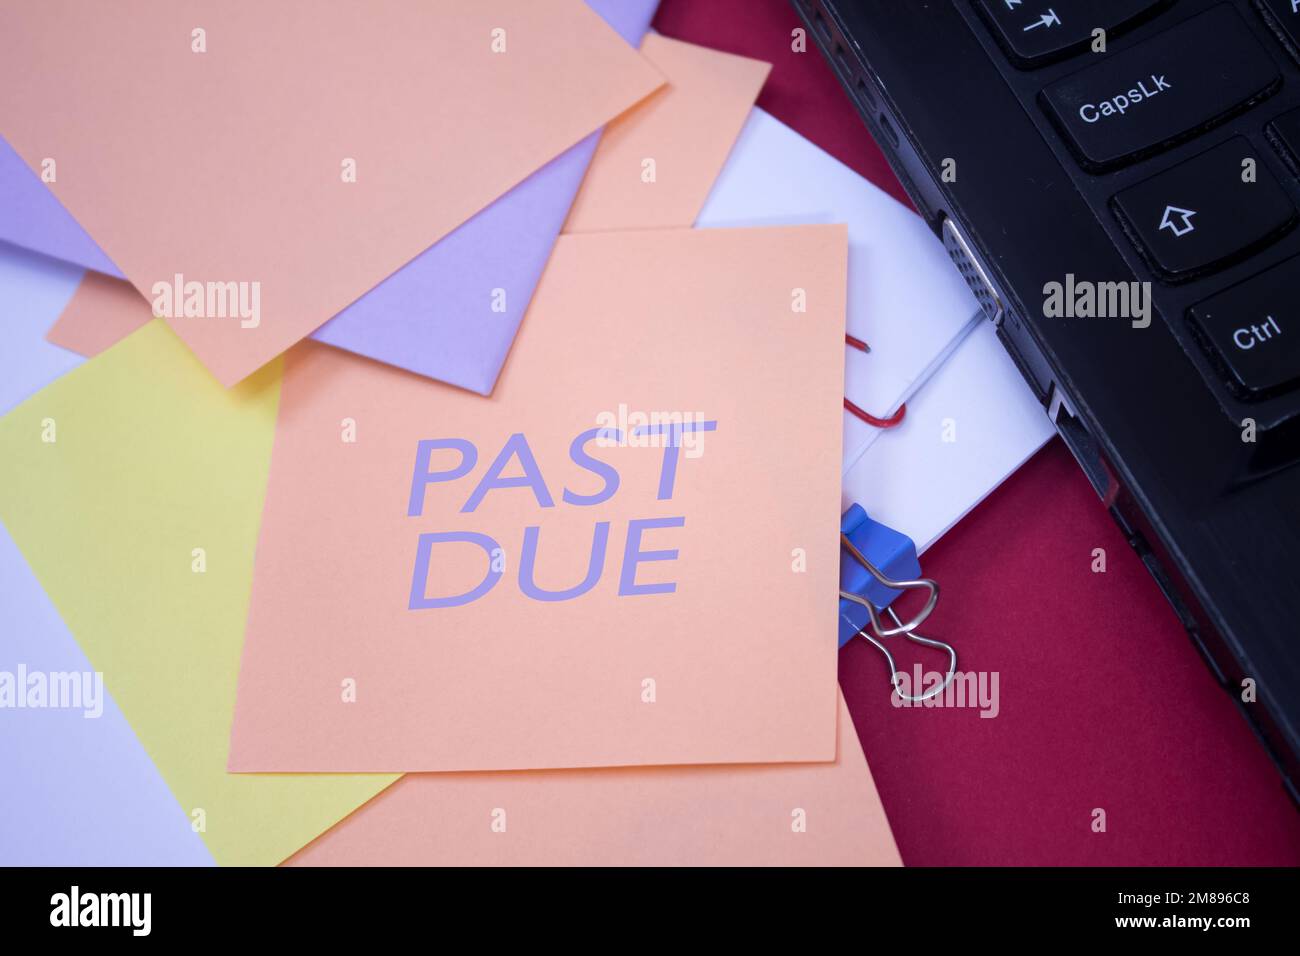 Past Due. Text on adhesive note paper. Event, celebration reminder message. Stock Photo